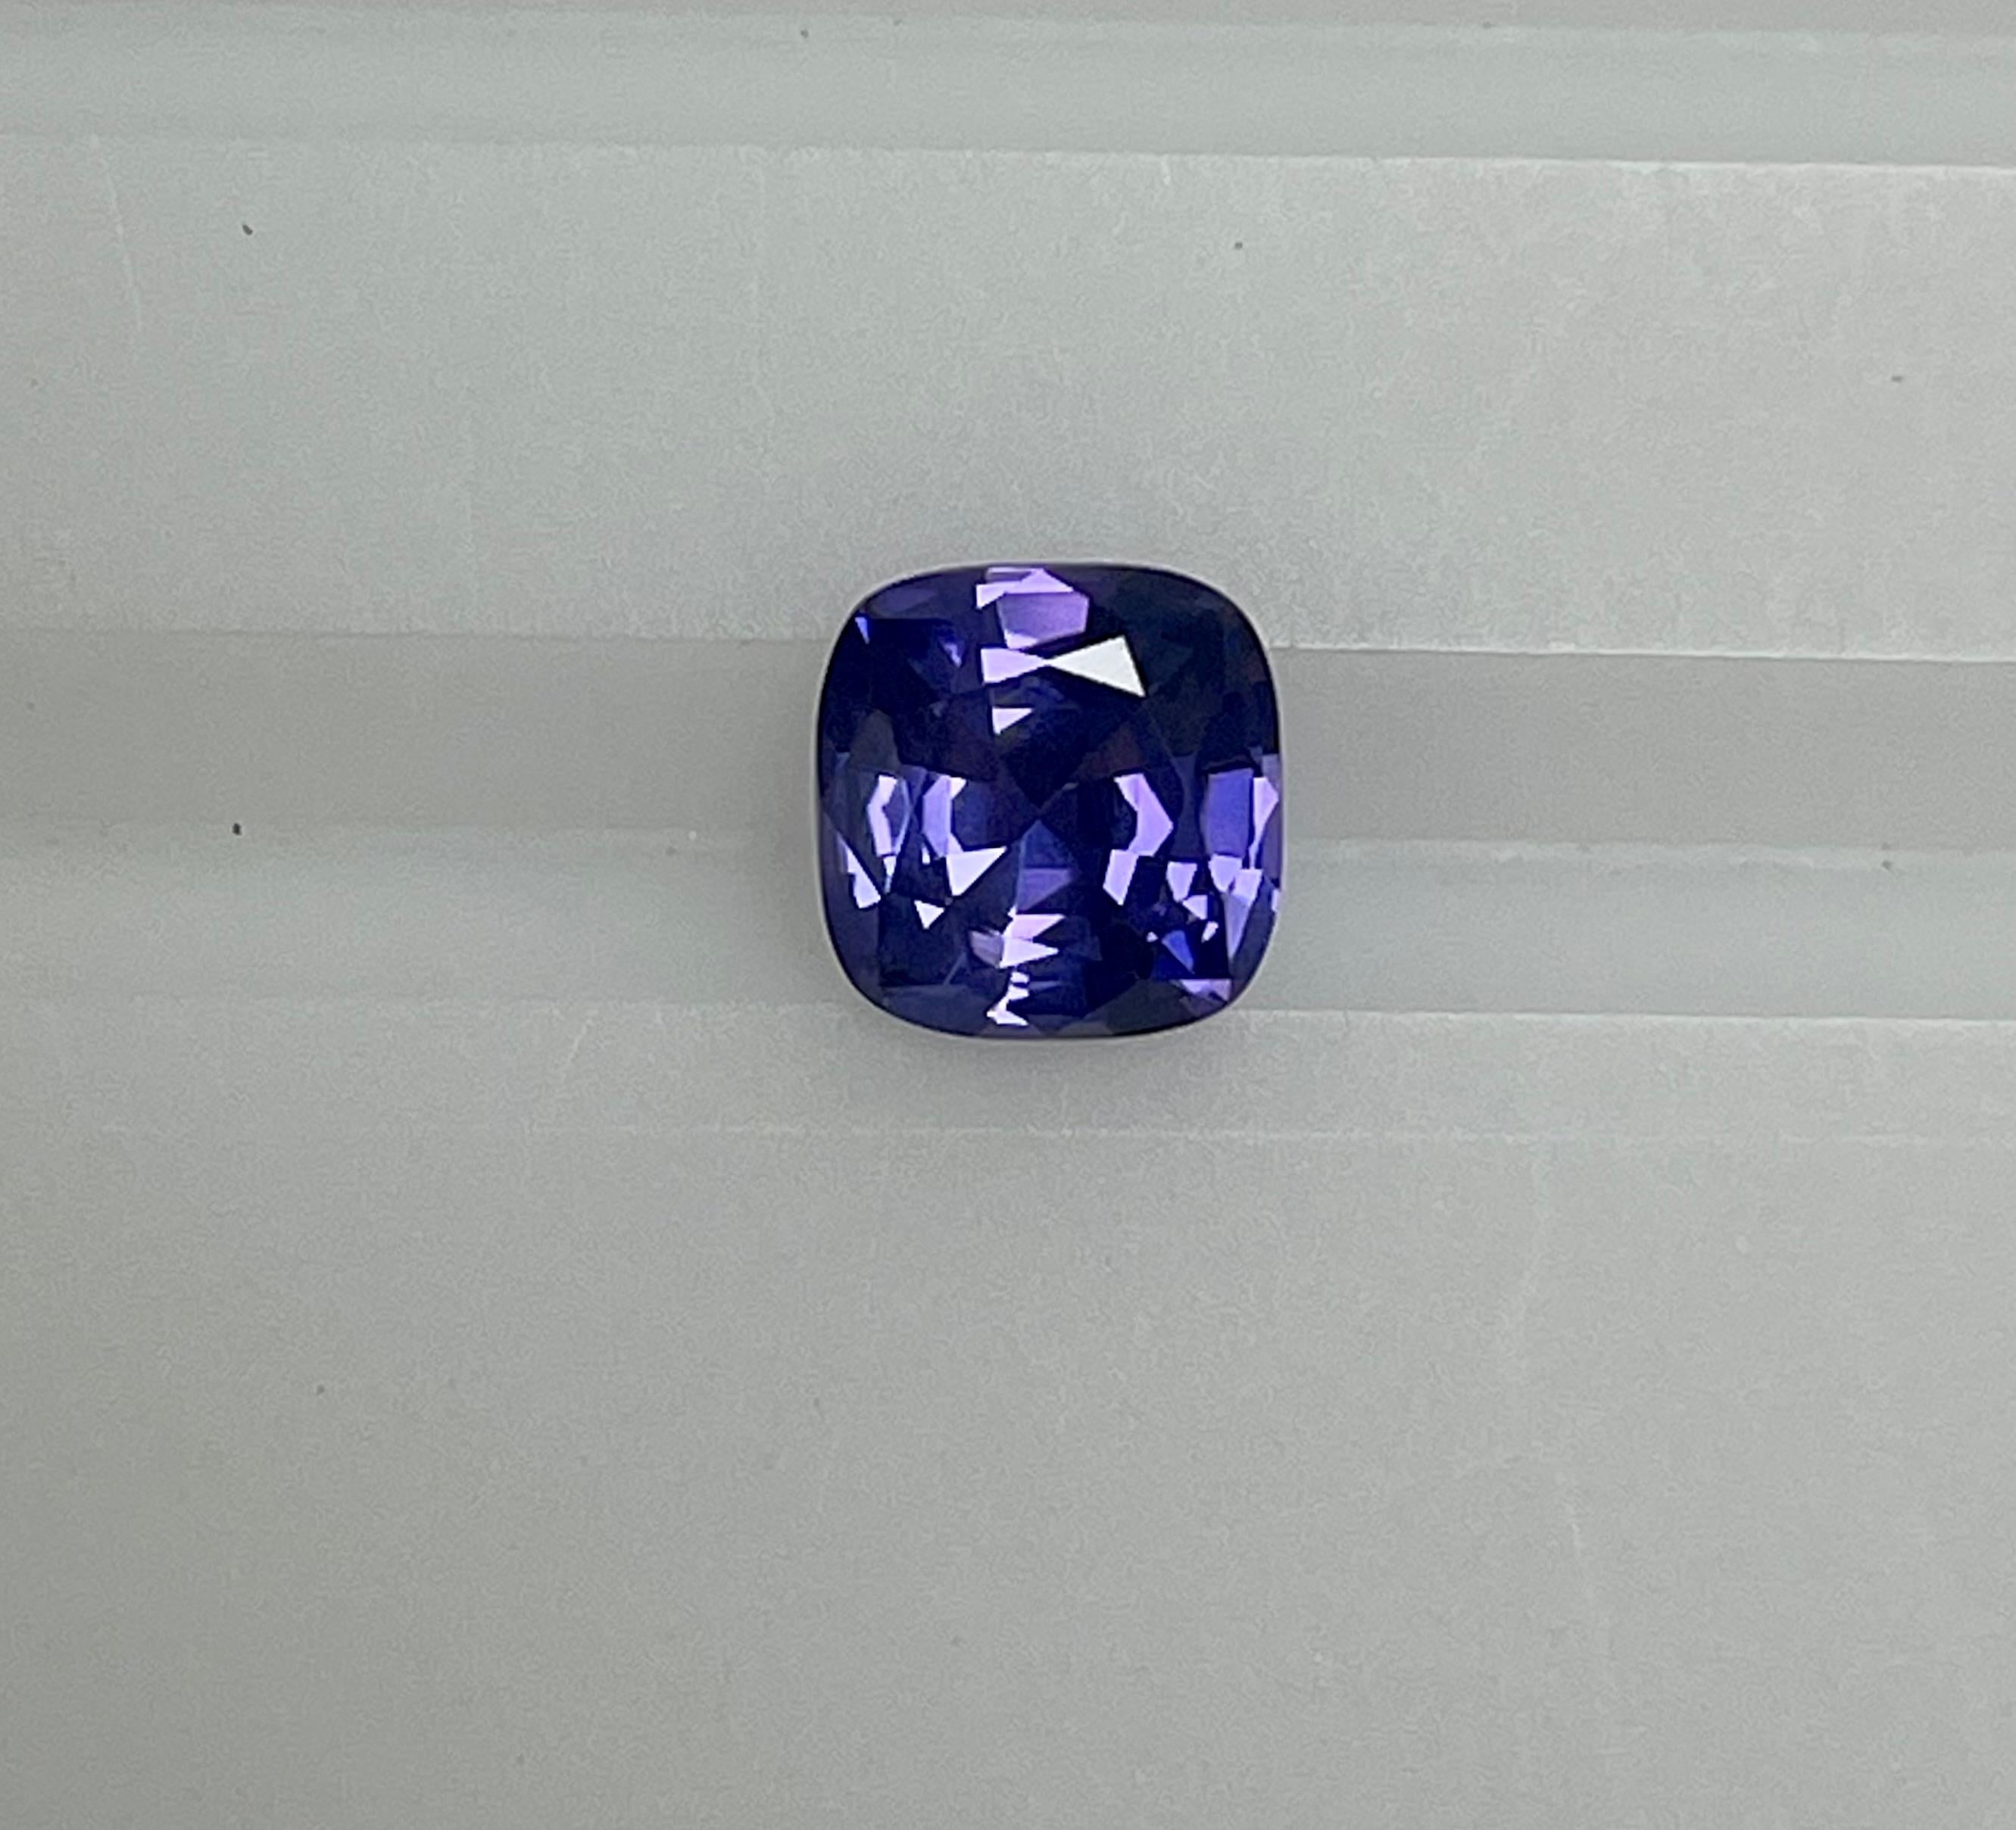 This 1.89 Ct purple sapphire exhibits a great purple color and the square cushion shape is beautifully cut and with that being a natural no heat sapphire, it makes a very unique combination of fine color and shape and color and very much in demand .